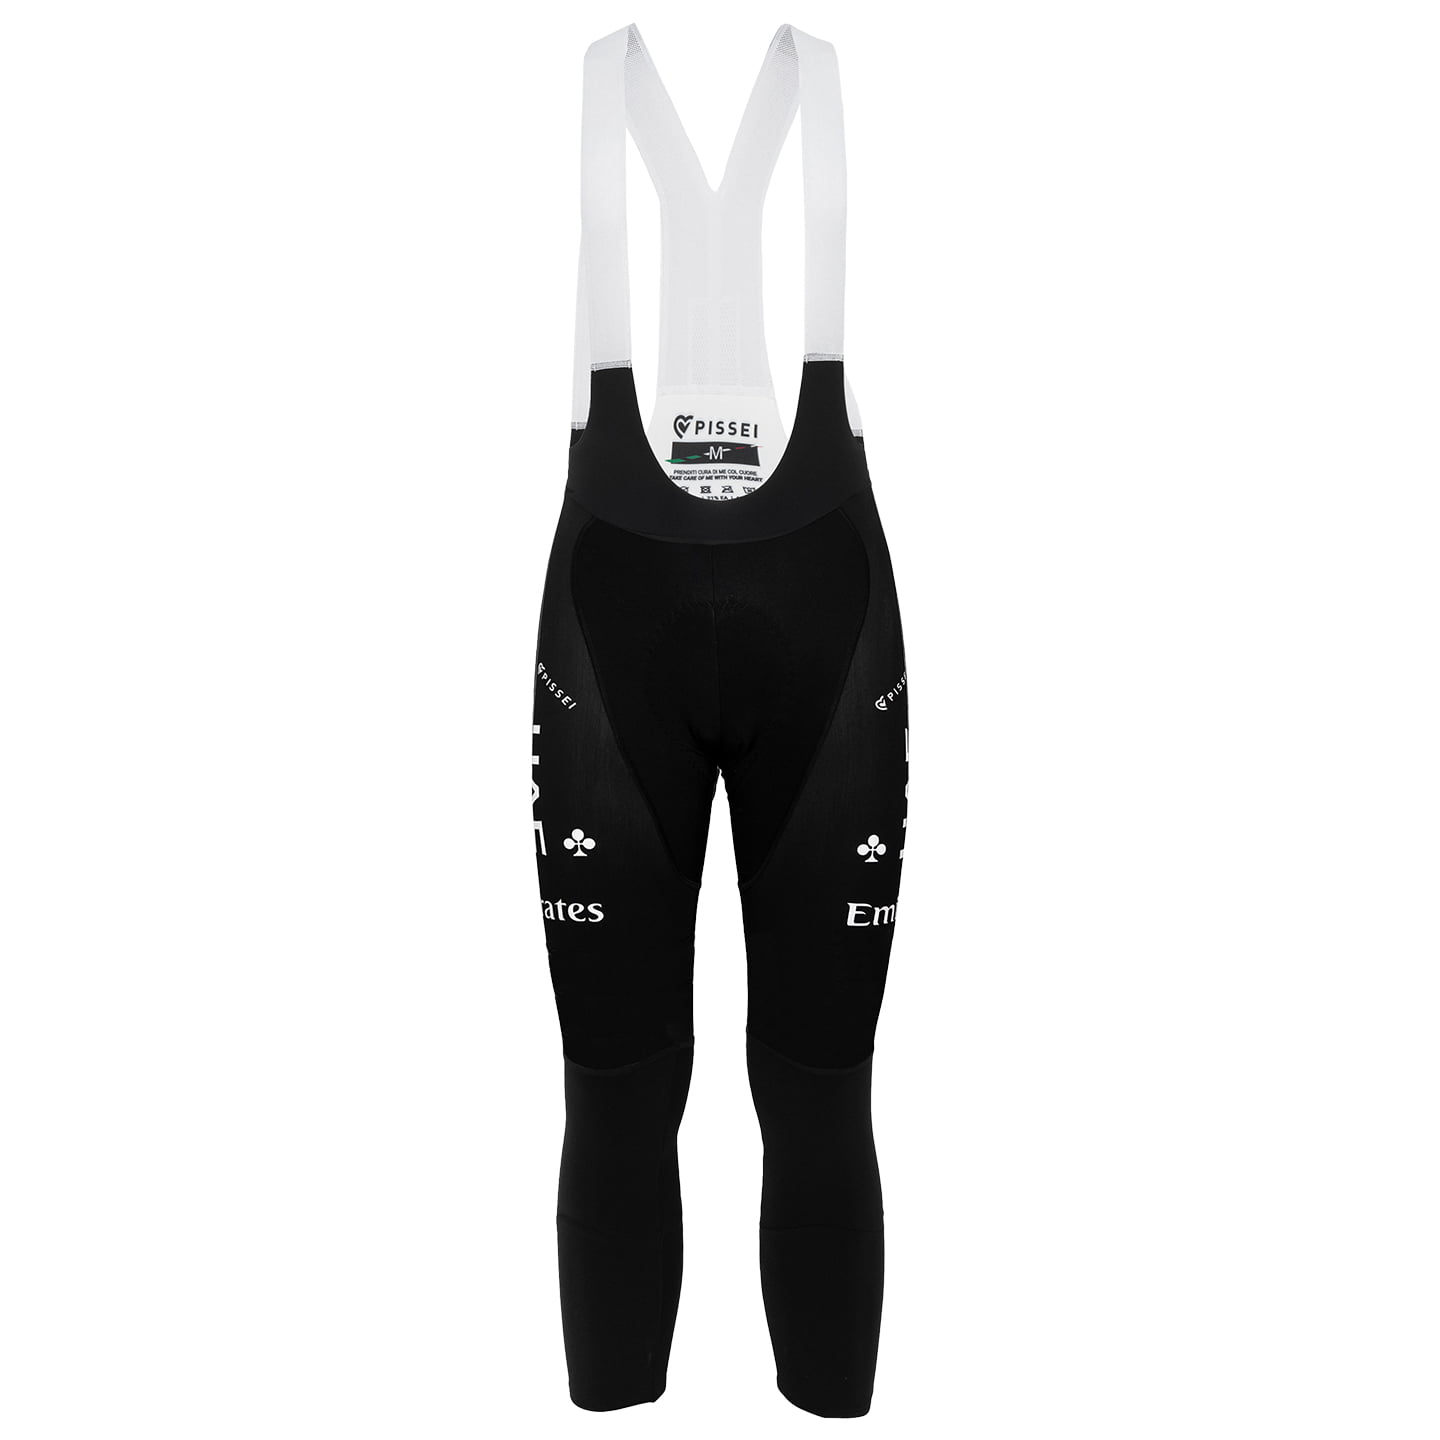 UAE TEAM EMIRATES 2024 Bib Tights, for men, size L, Cycle tights, Cycling clothing